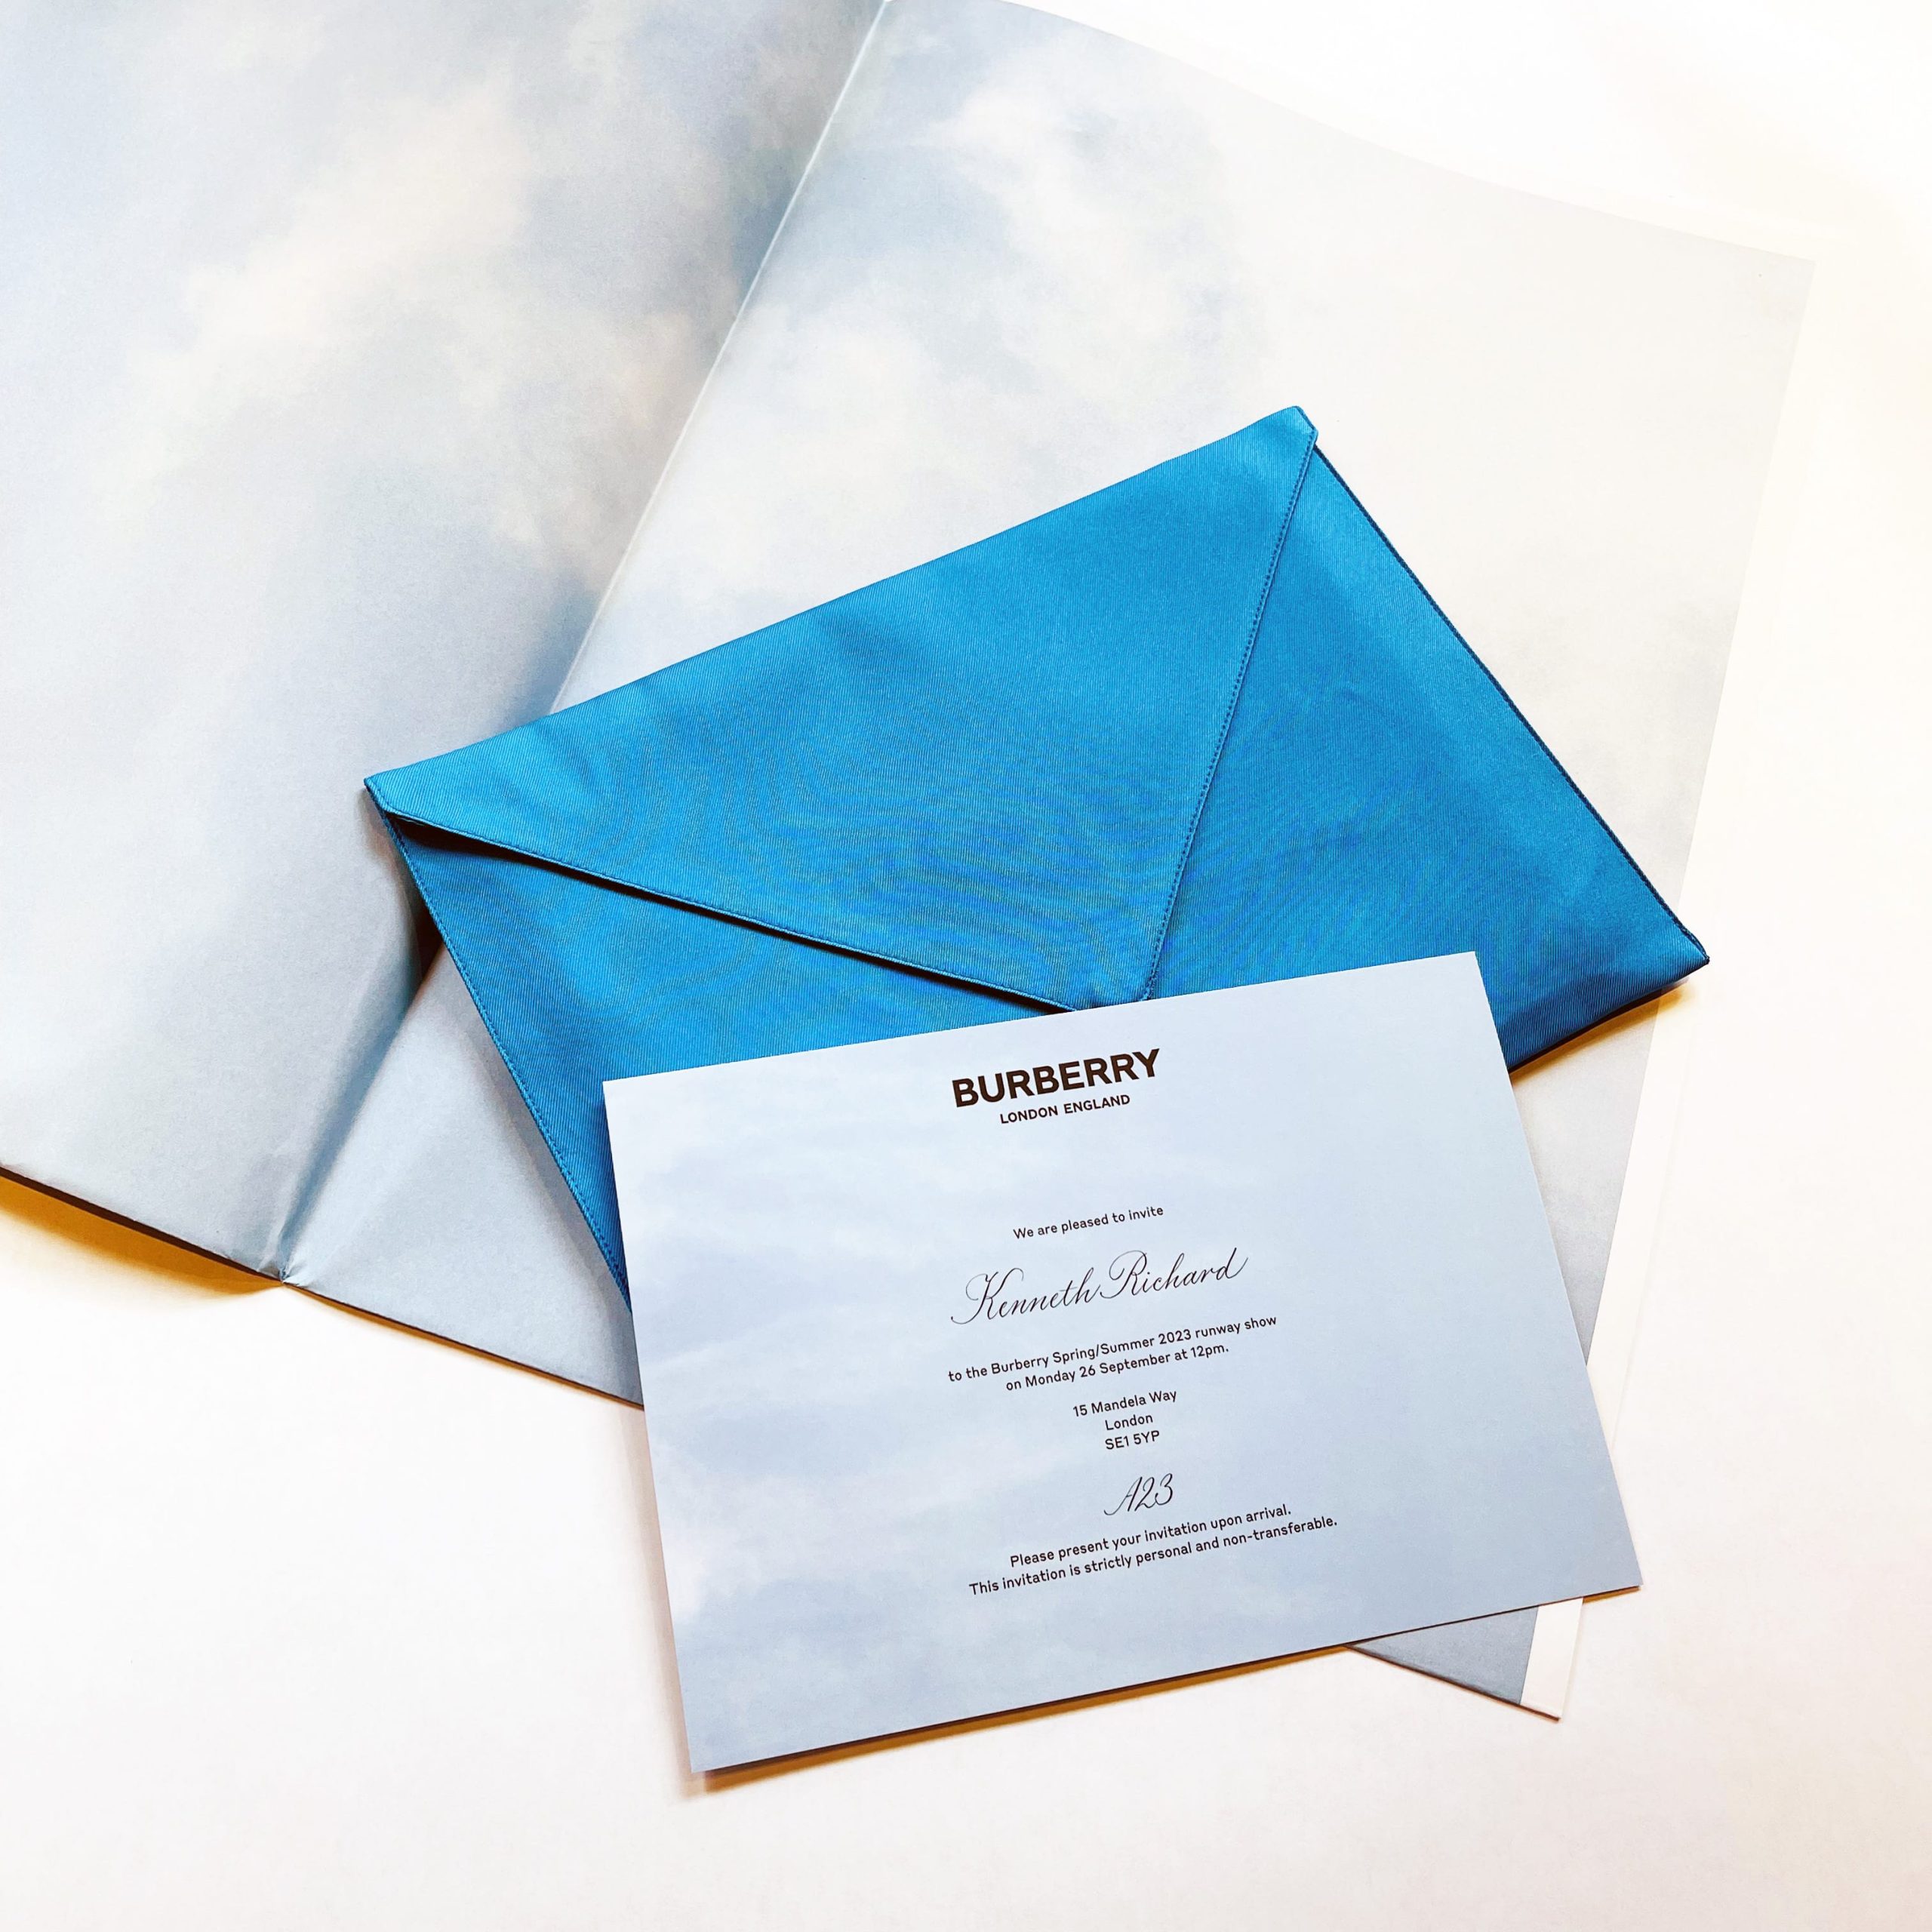 The Best Spring 2023 Fashion Show Invitations